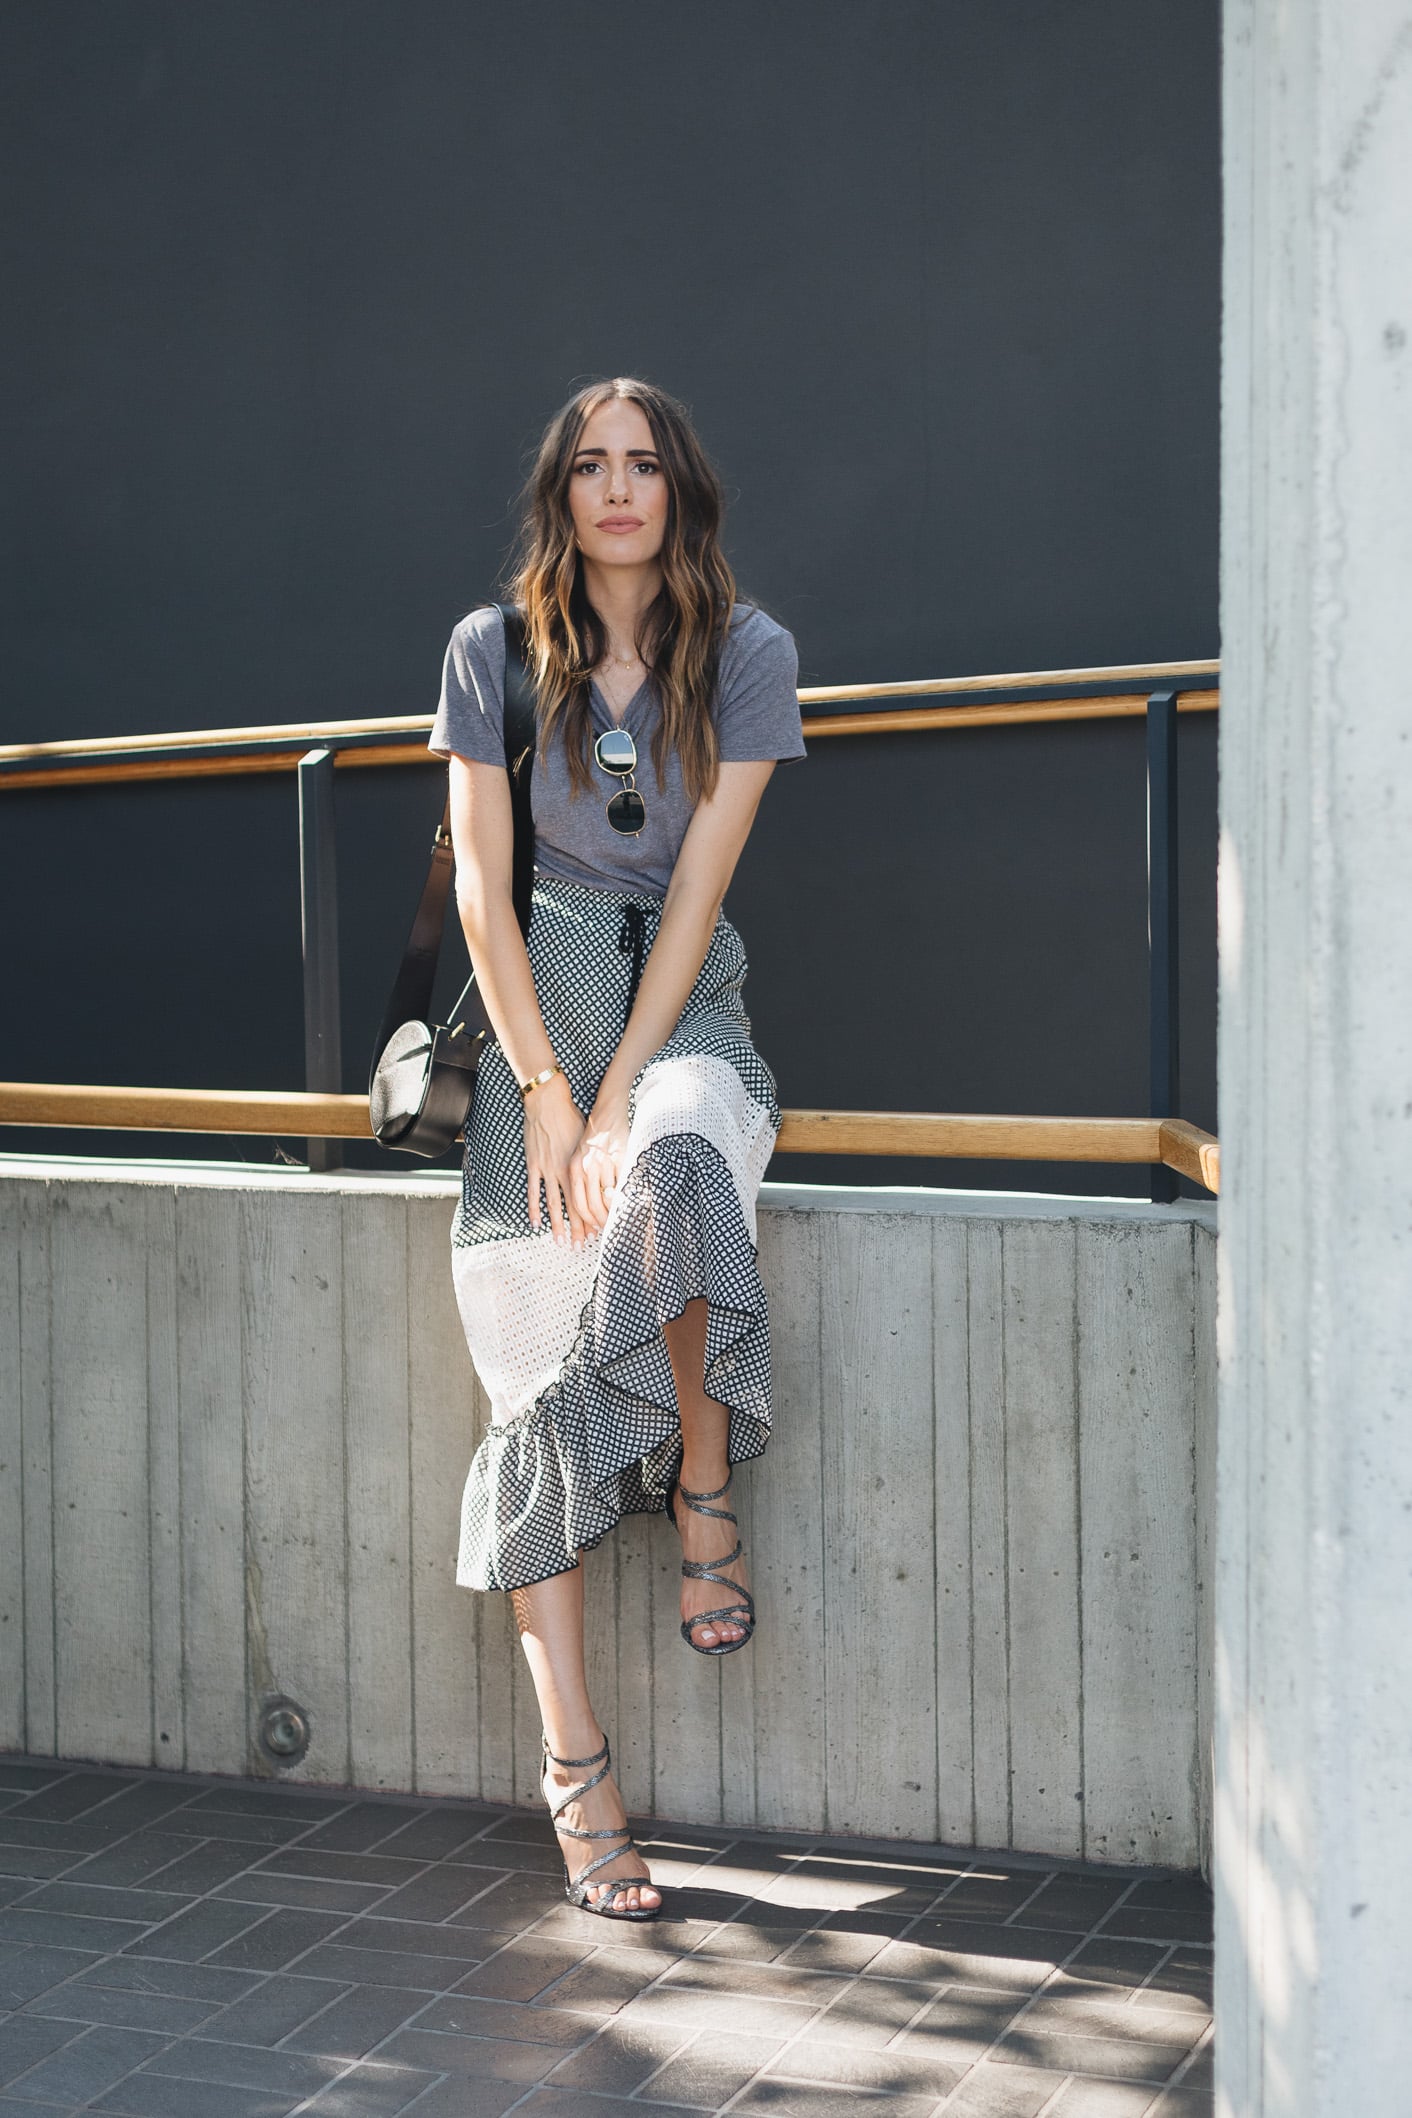 Louise Roe tips on how to love Mondays and increase productivity